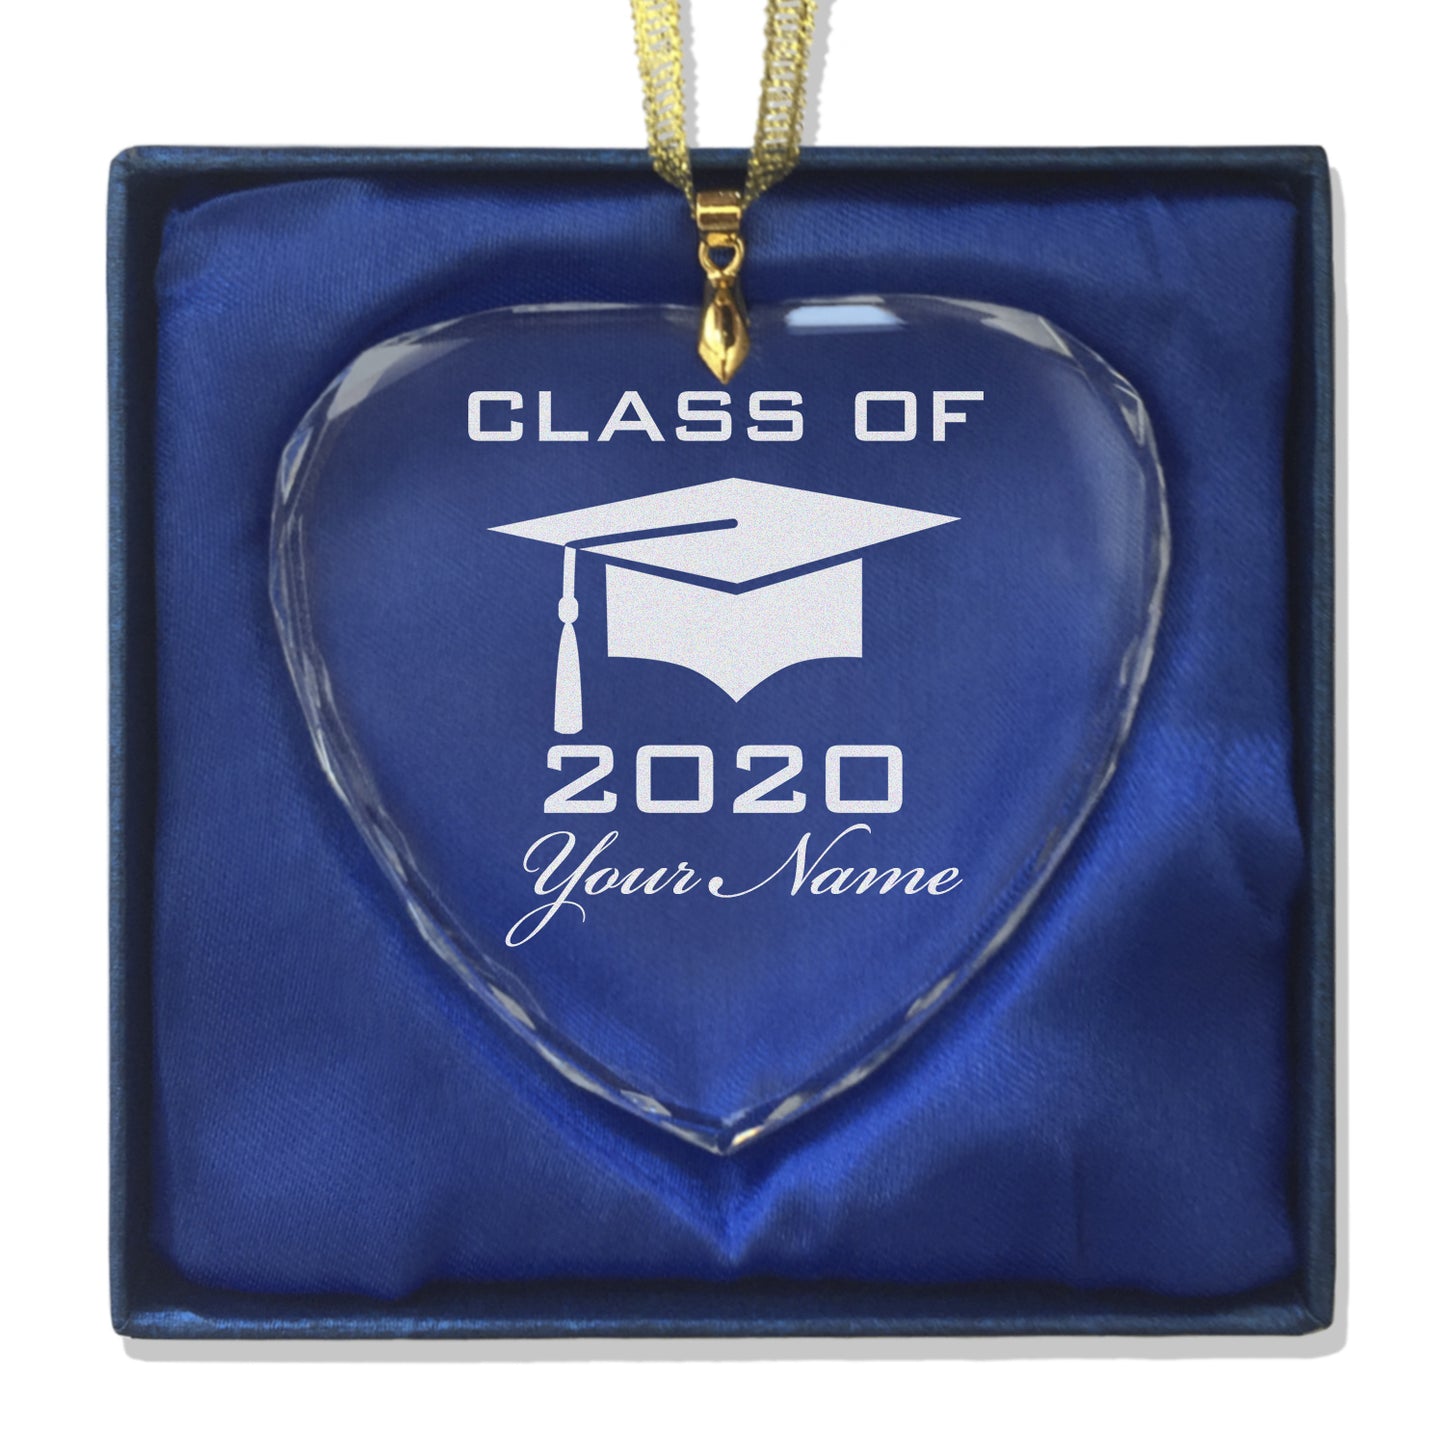 LaserGram Christmas Ornament, Grad Cap Class of 2020, Personalized Engraving Included (Heart Shape)